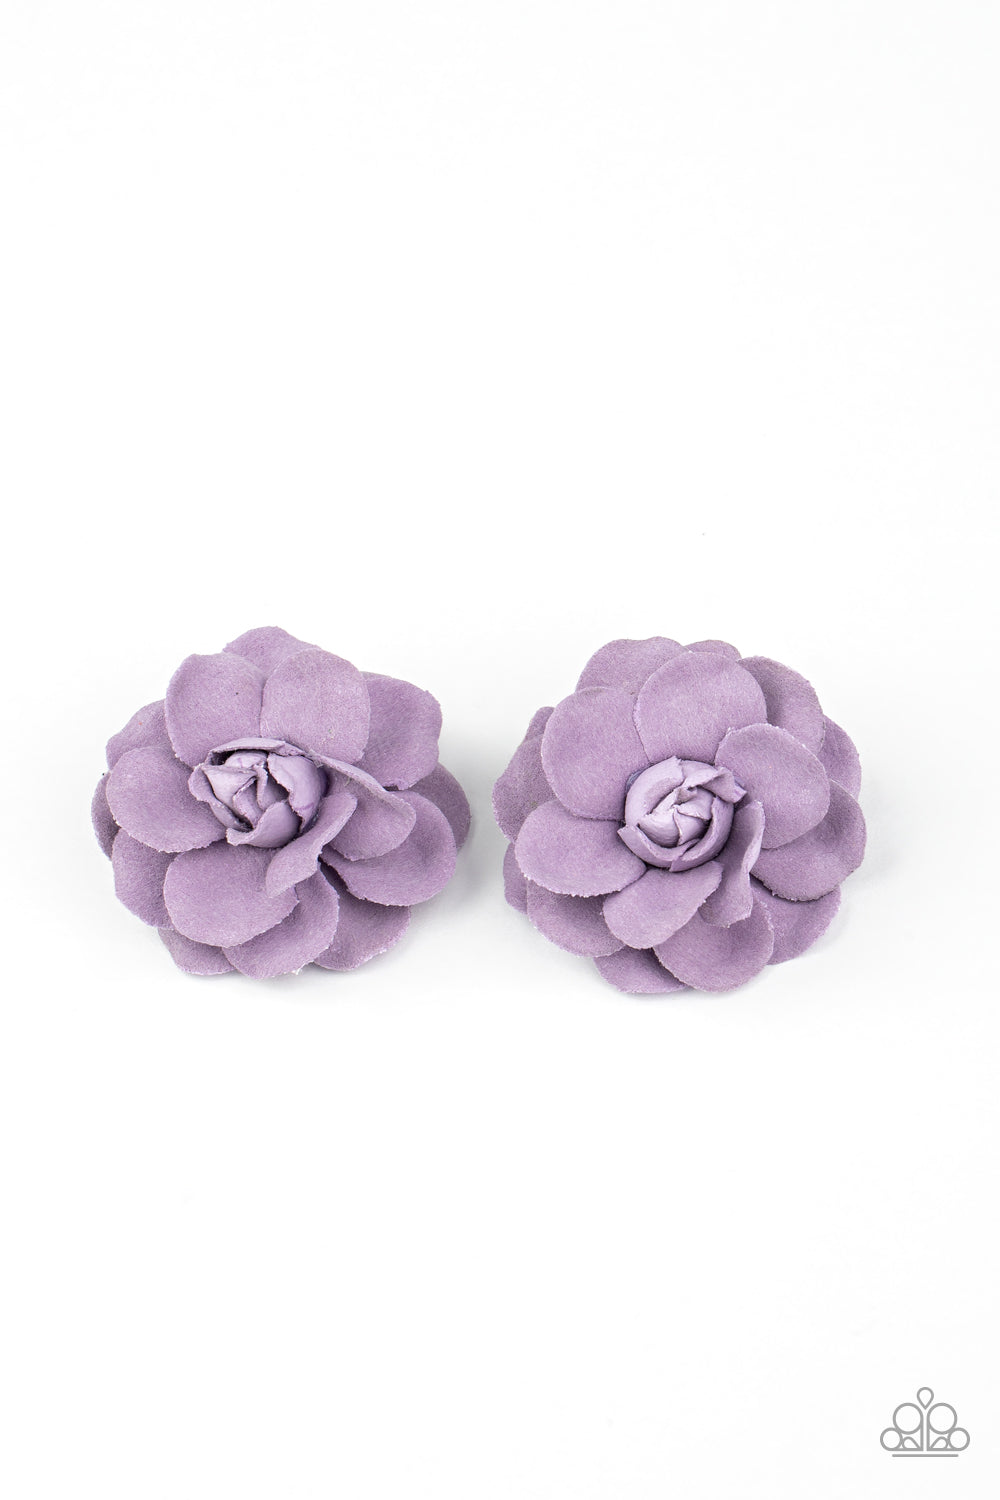 Shes a GROW-Getter Pink Hair Clips - Princess Glam Shop